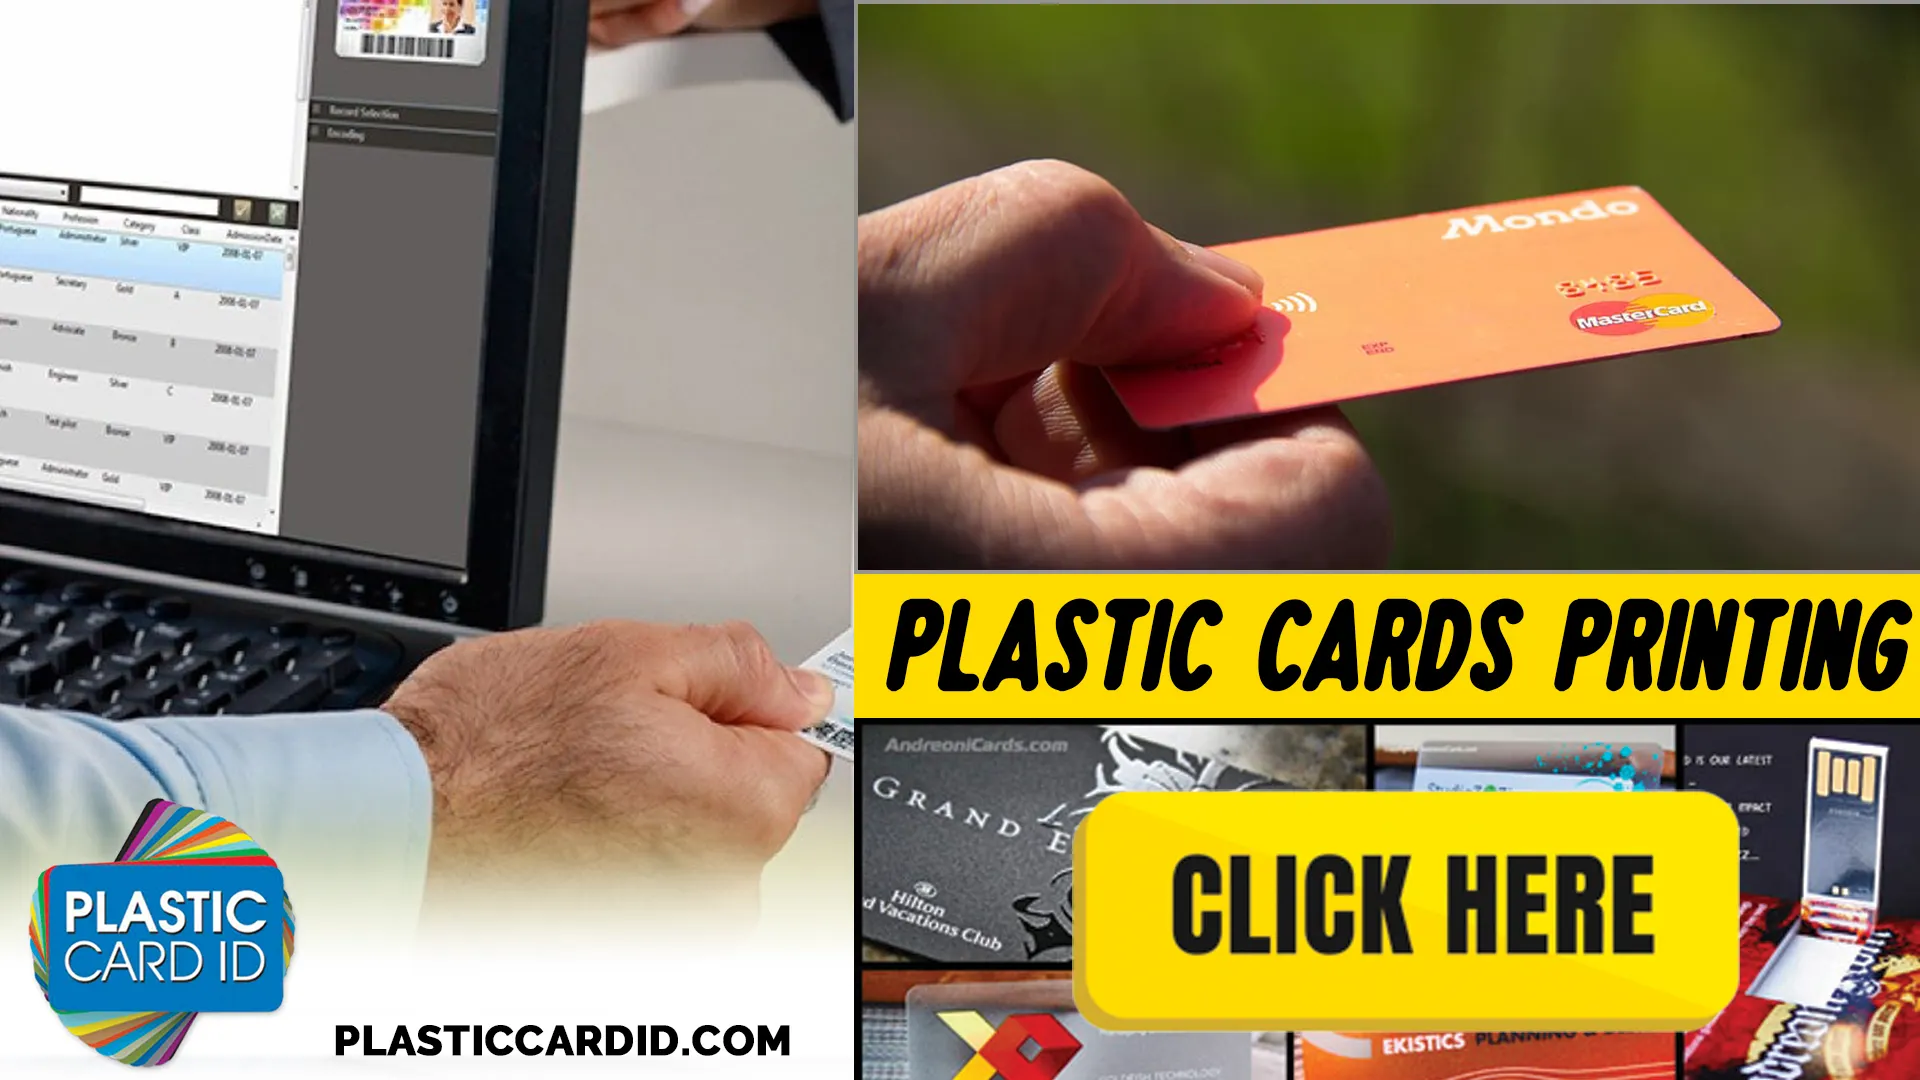 Discover the Clarity of Plastic Card ID
's FAQs on Plastic Card Printers